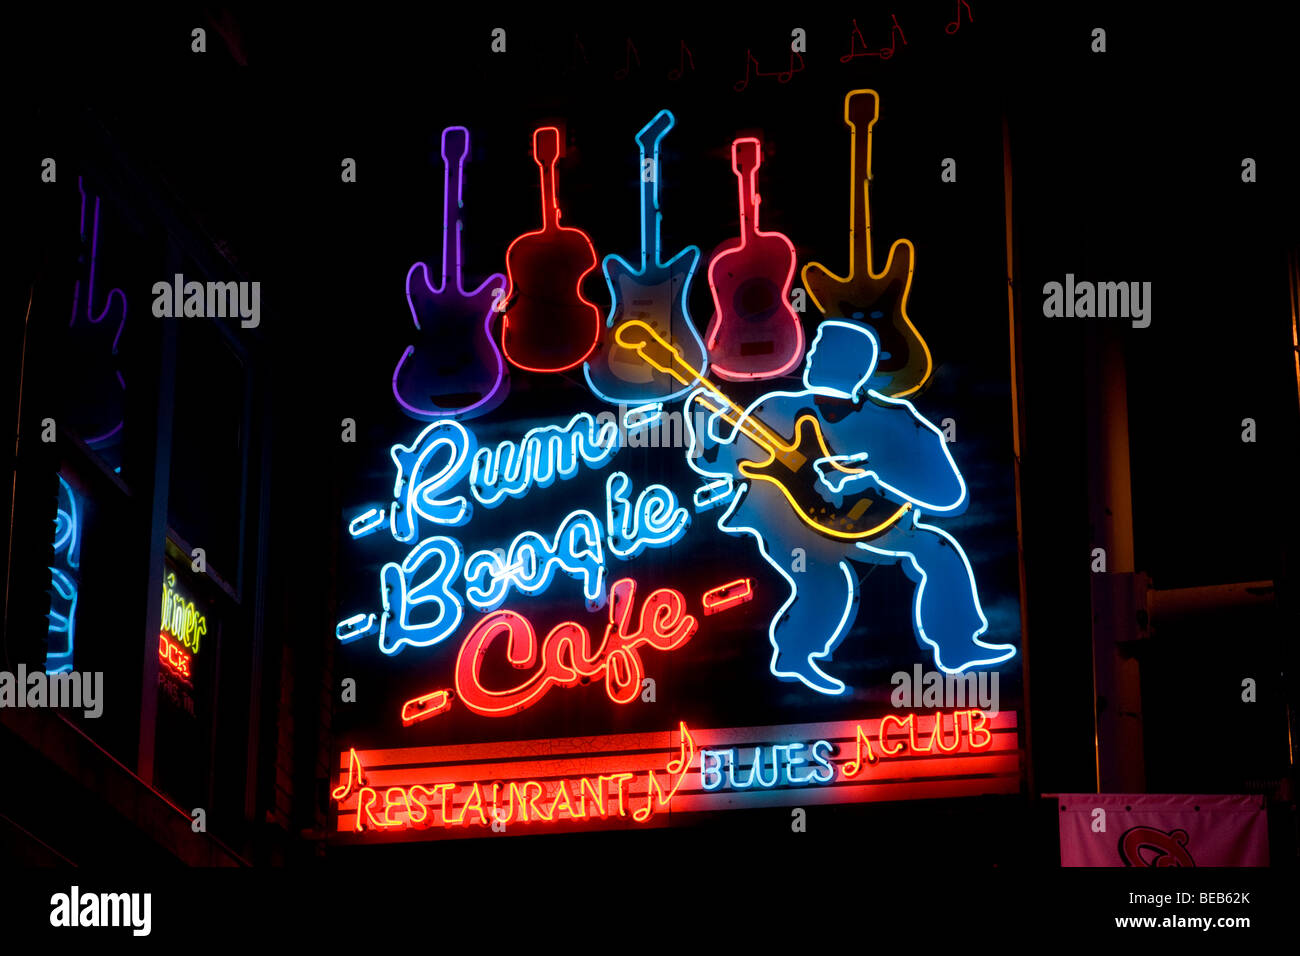 Rum Boogie Cafe Restaurant & Blues Club neon sign at night, Beale St, Memphis, Tennessee, USA Stock Photo